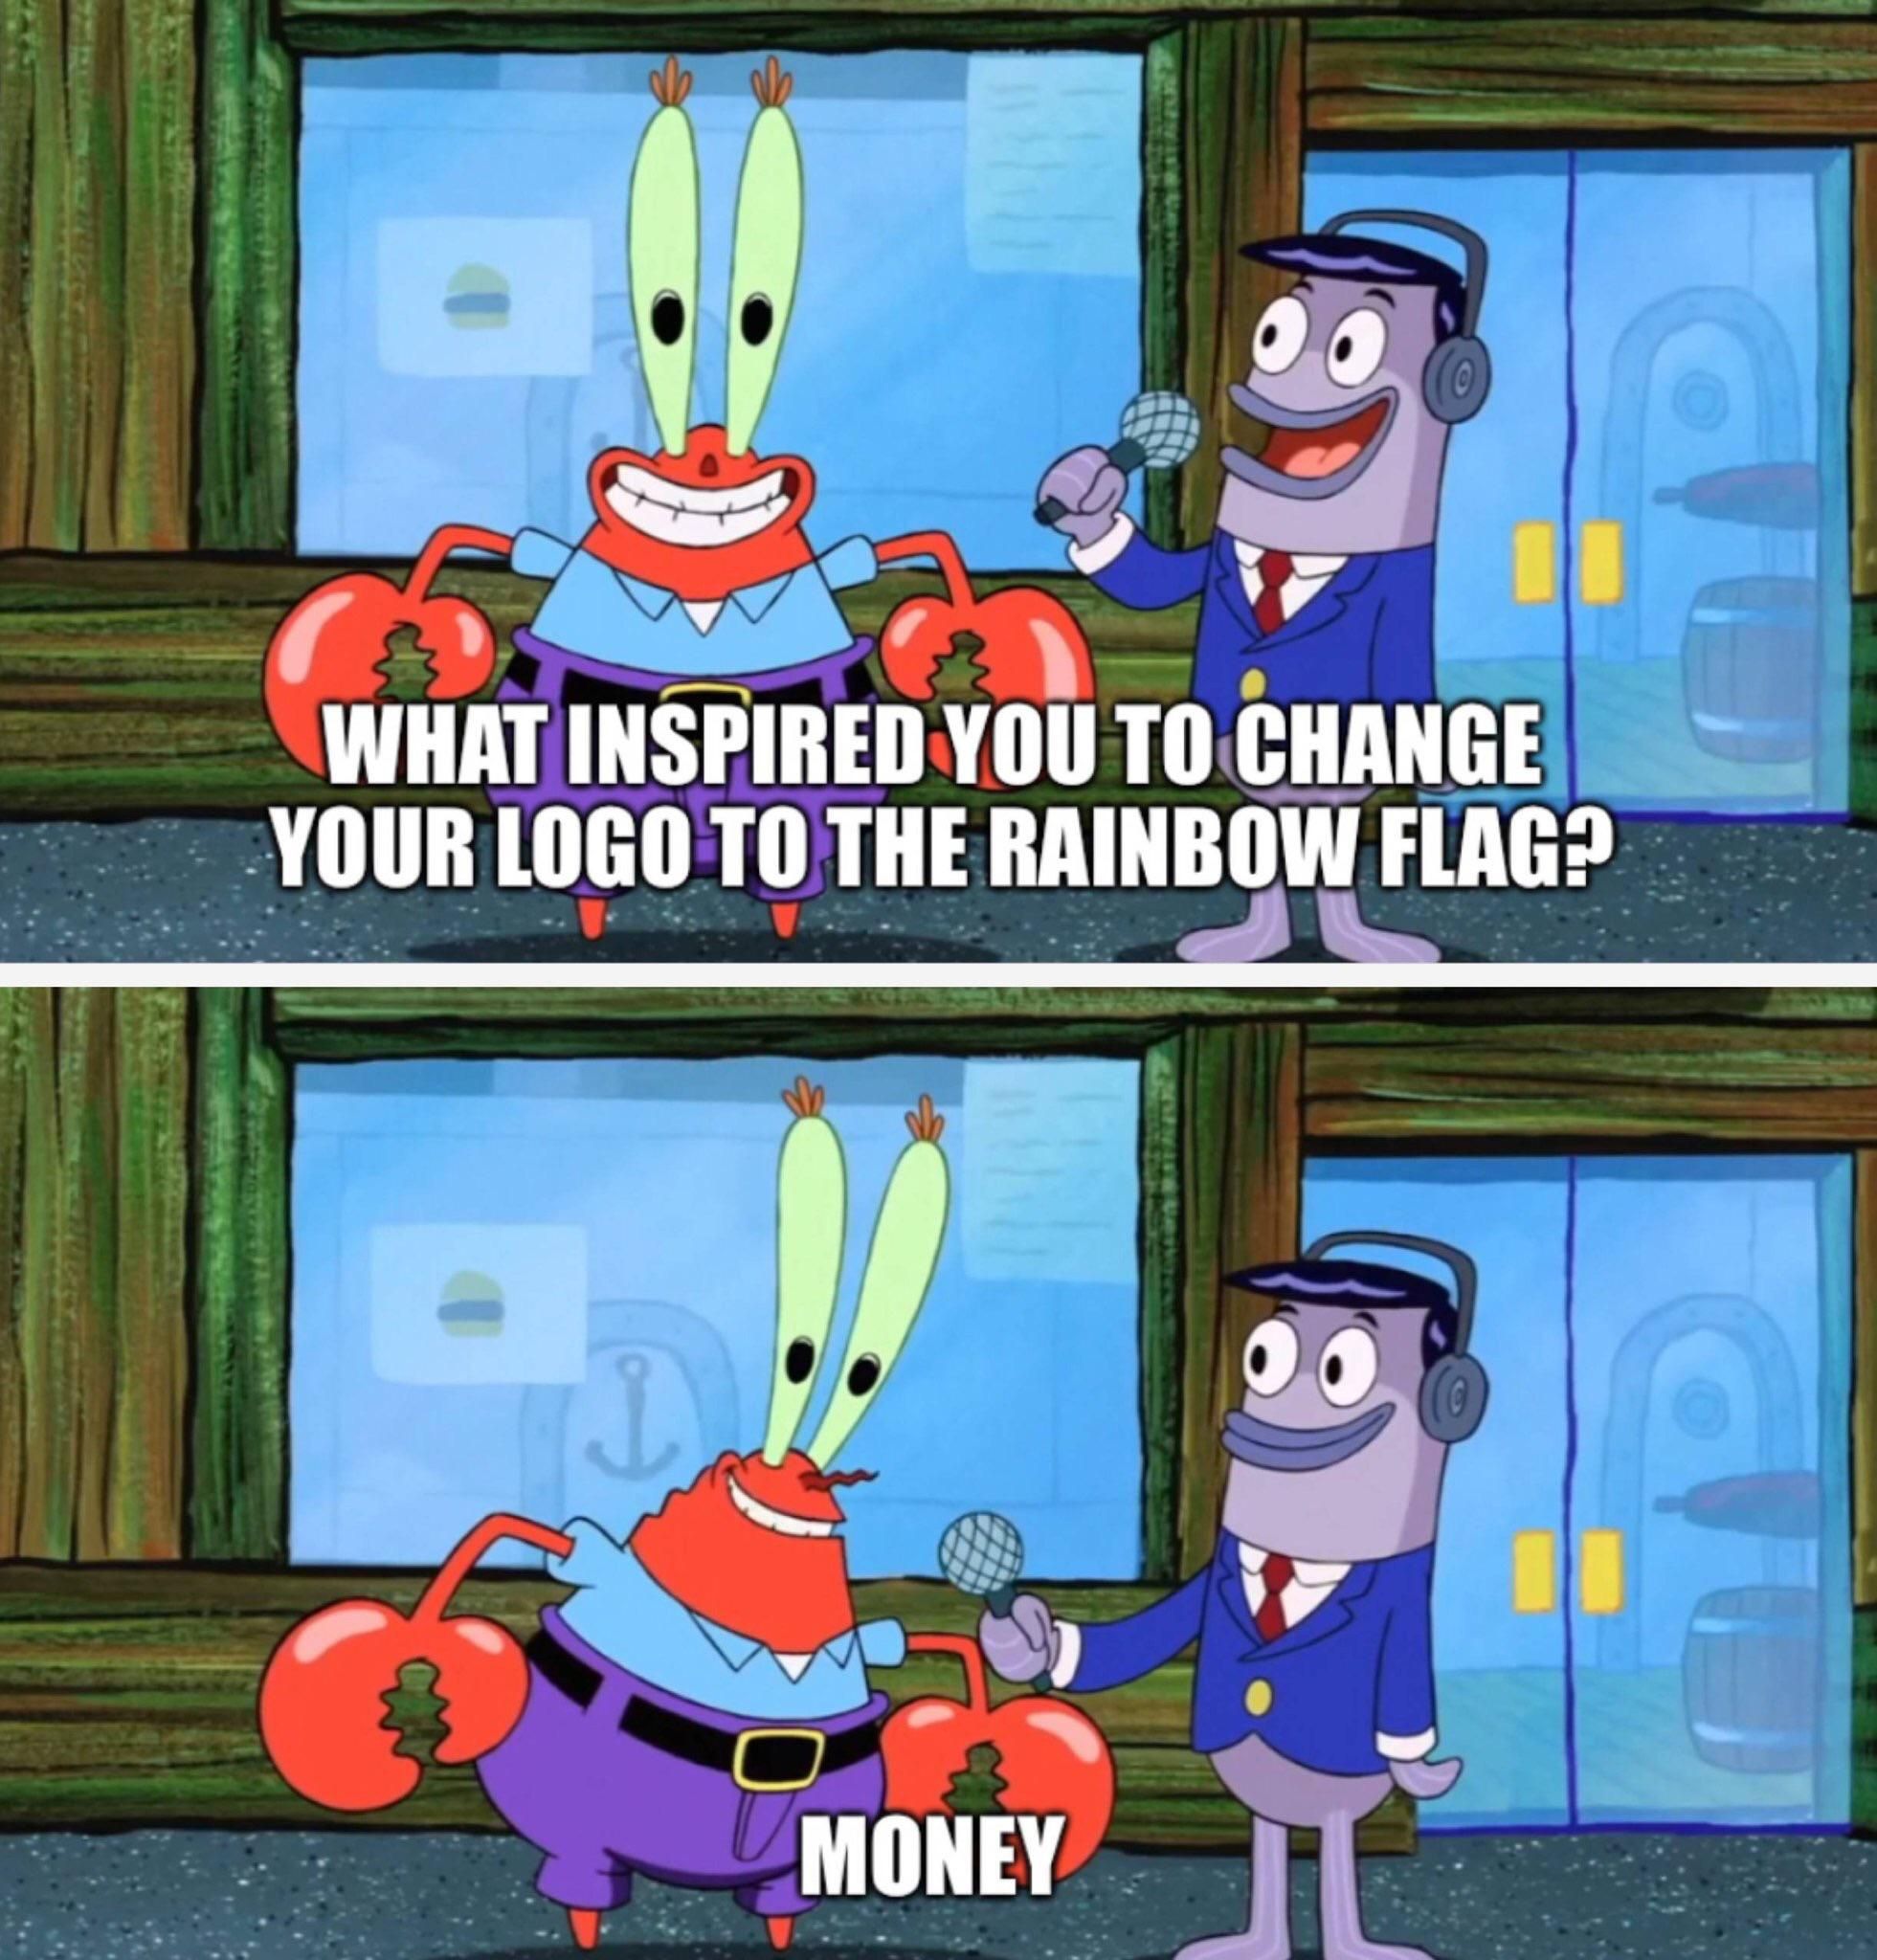 Corporations today